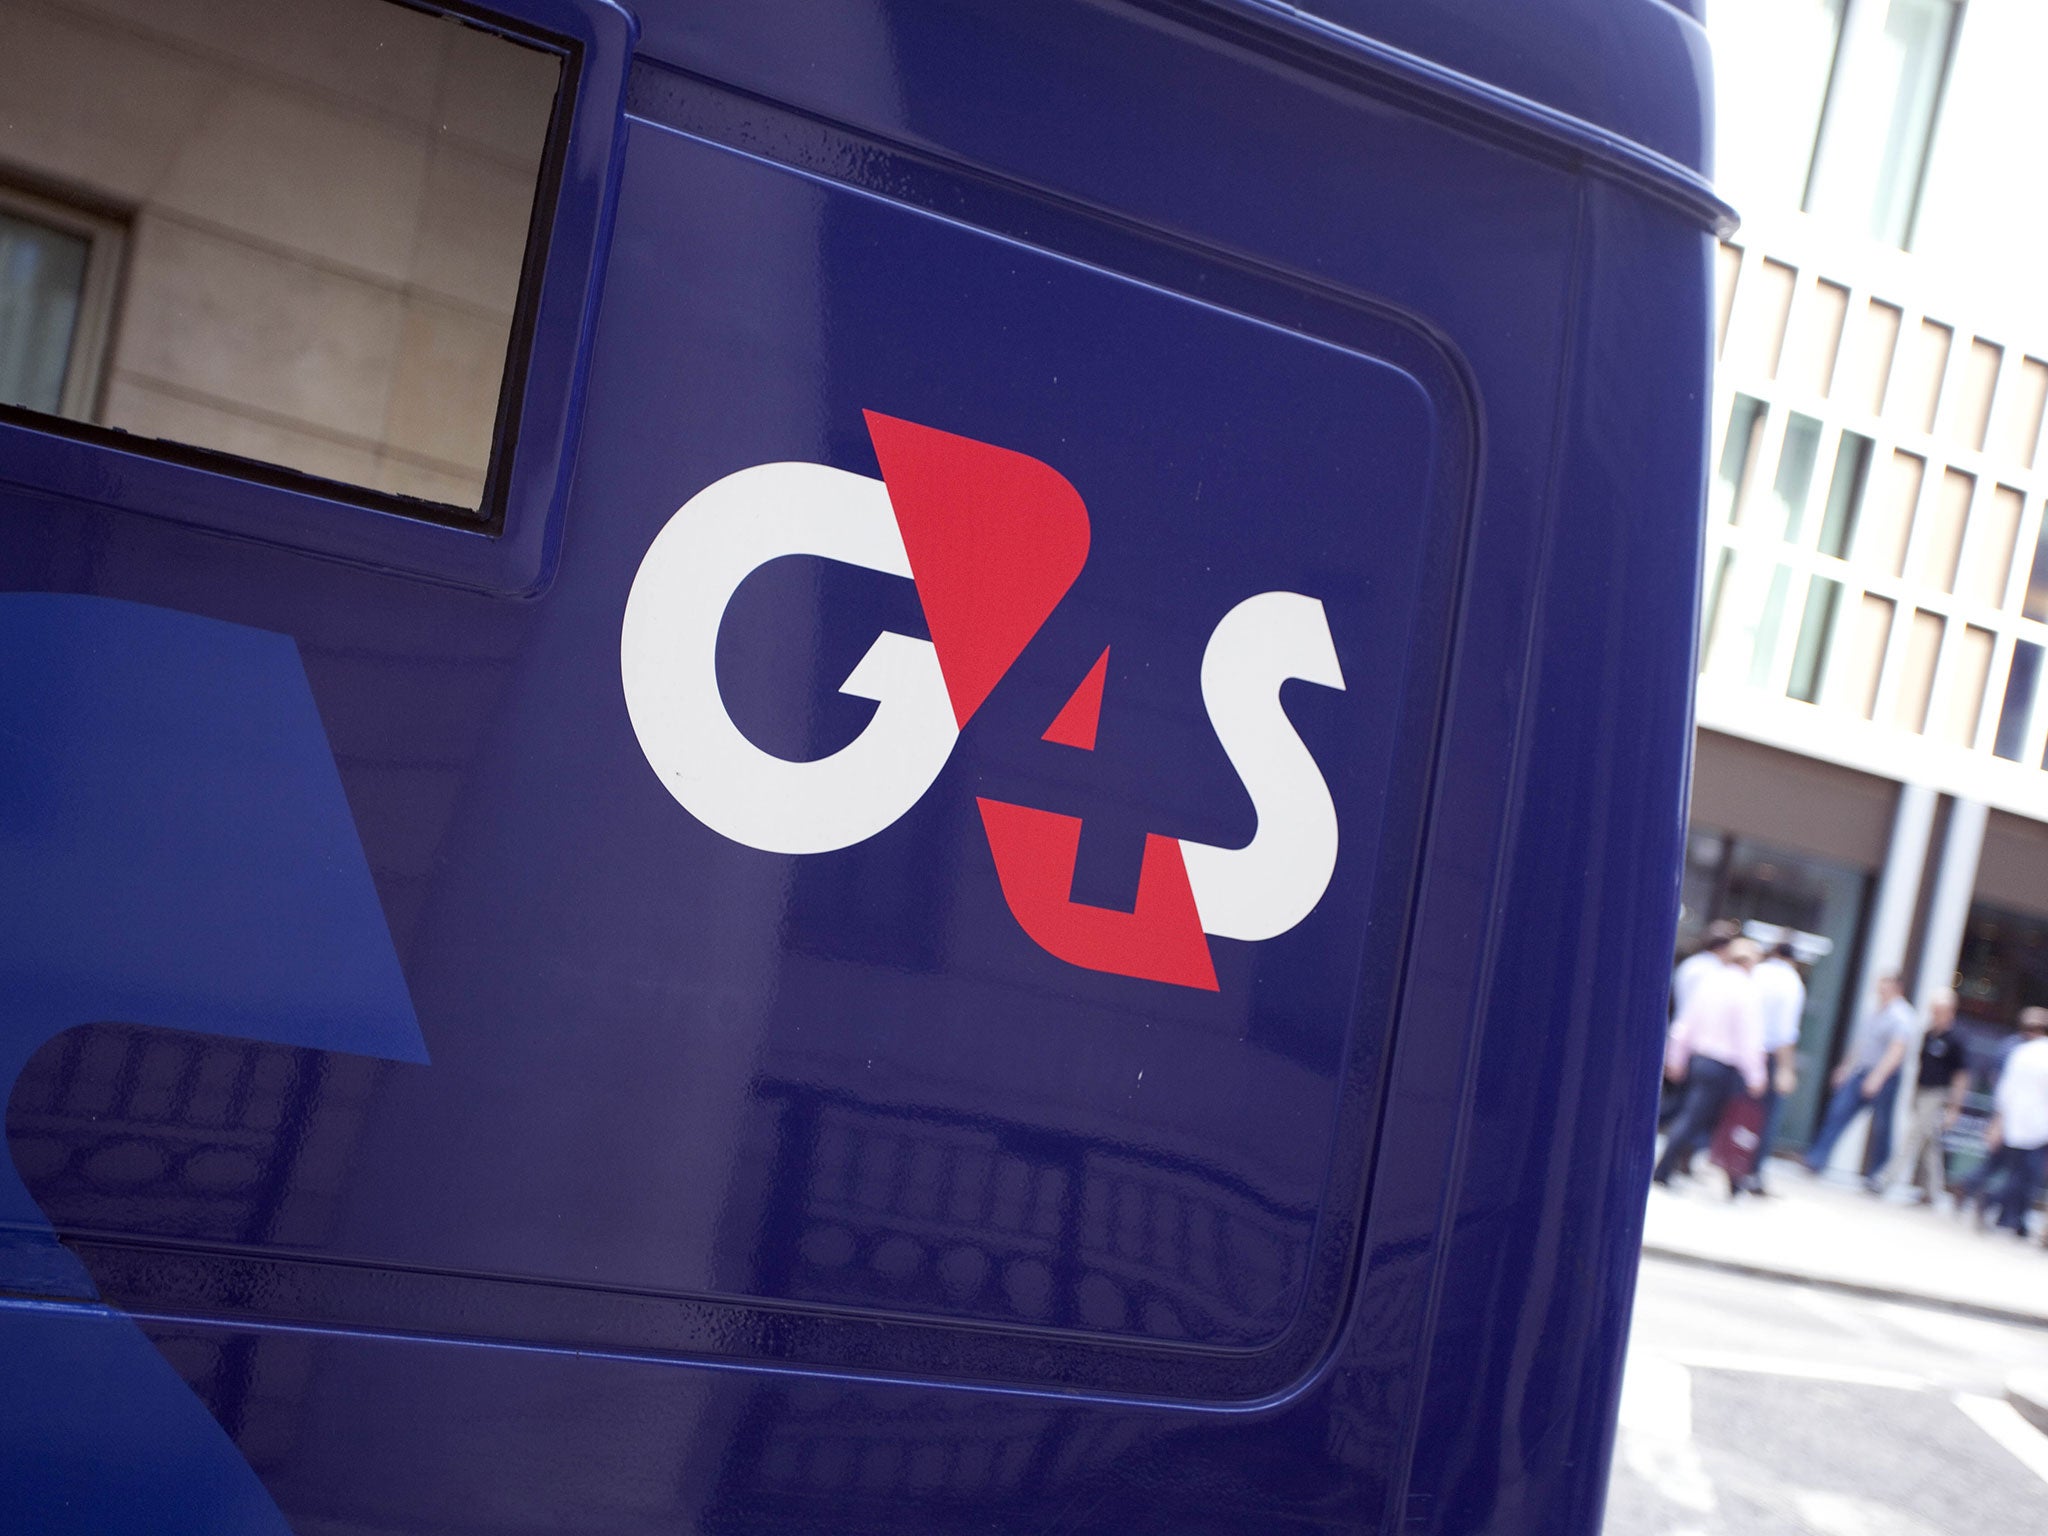 G4S has been hit by a series of scandals in recent years